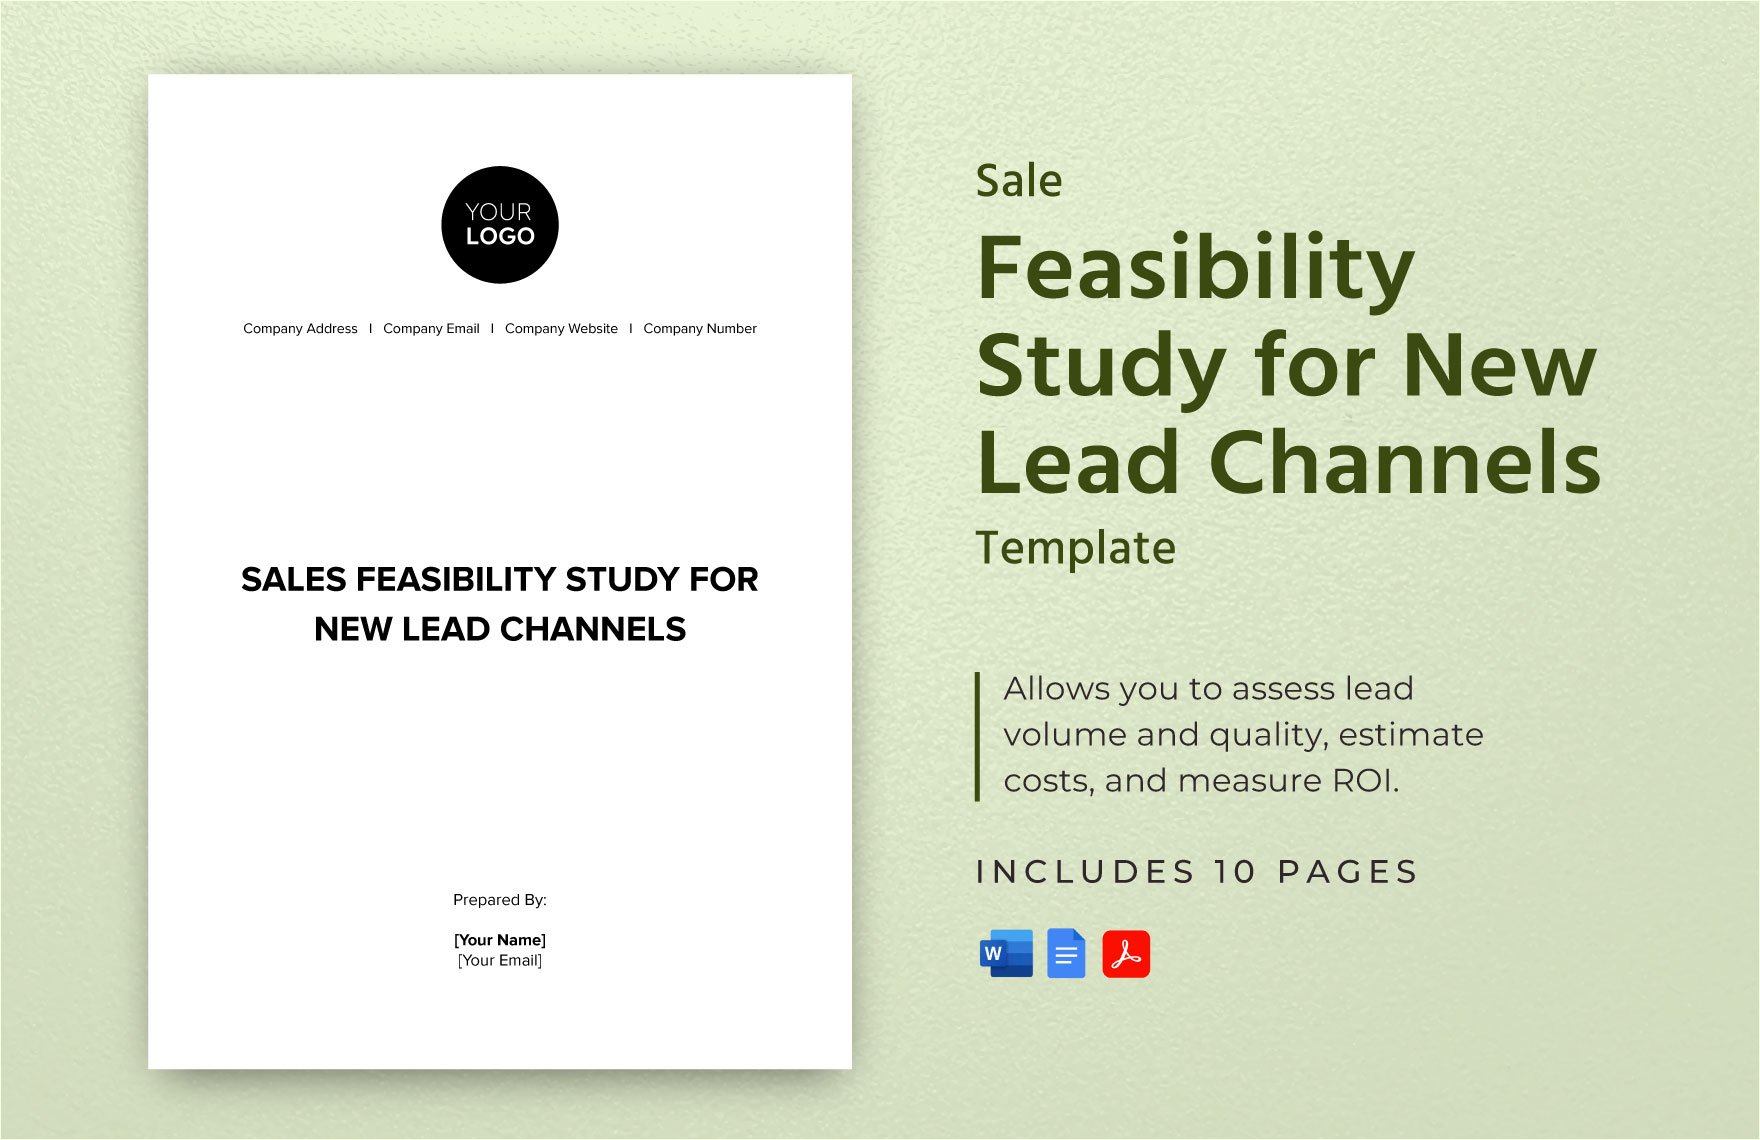 Sales Feasibility Study for New Lead Channels Template in Word, Google Docs, PDF